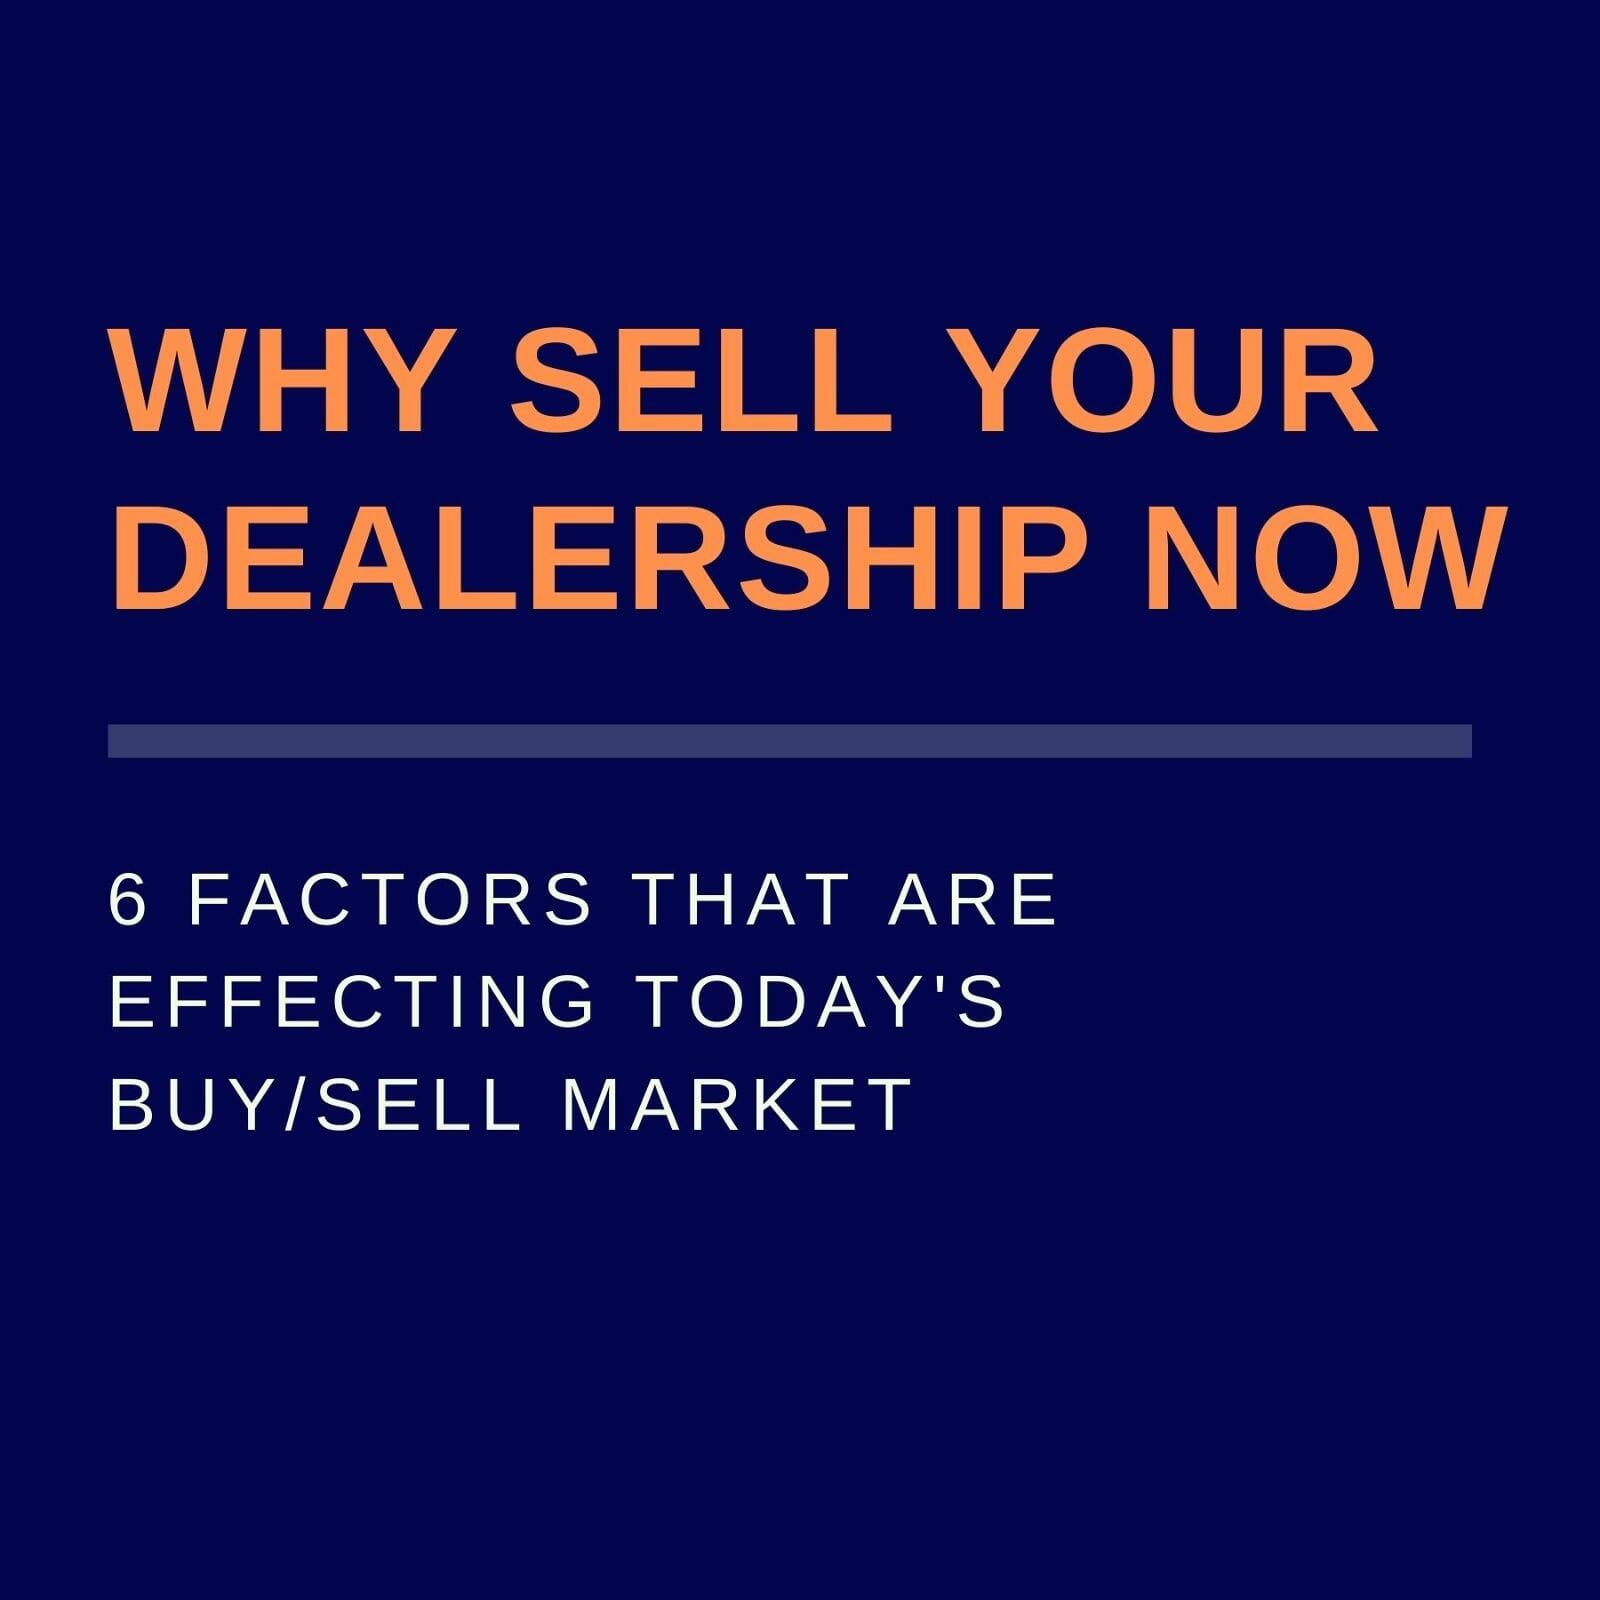 Benefits of Selling Your Dealership Now Rather Than Later